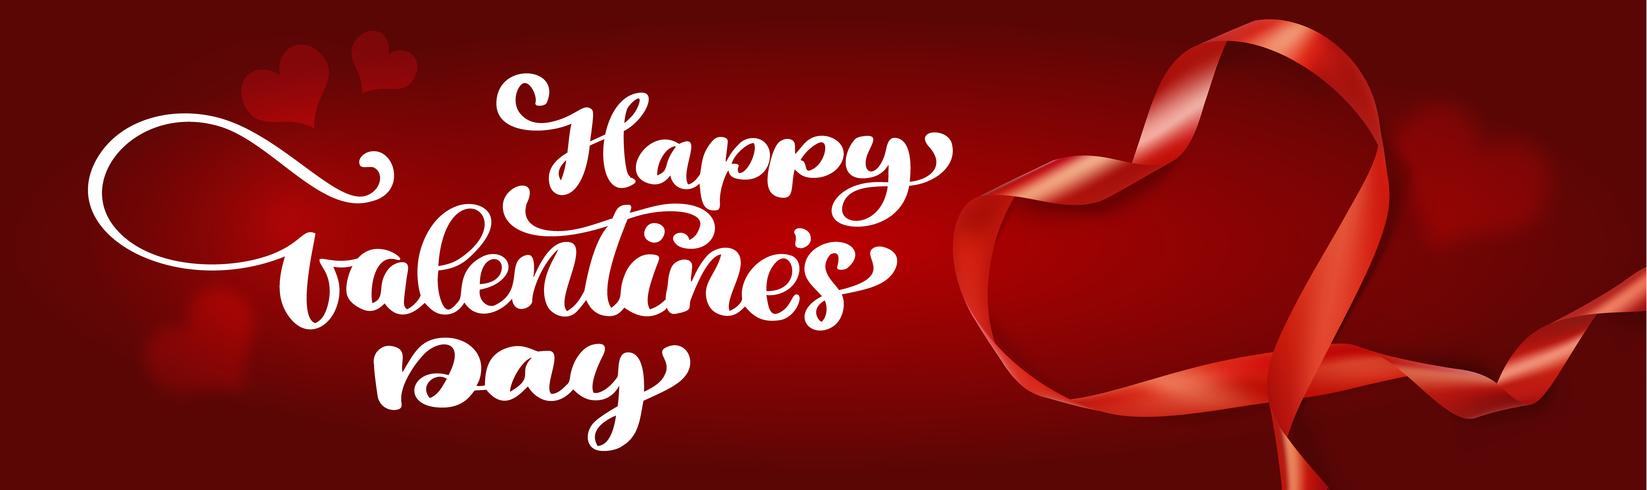 Text lettering Happy Valentines day banners vector